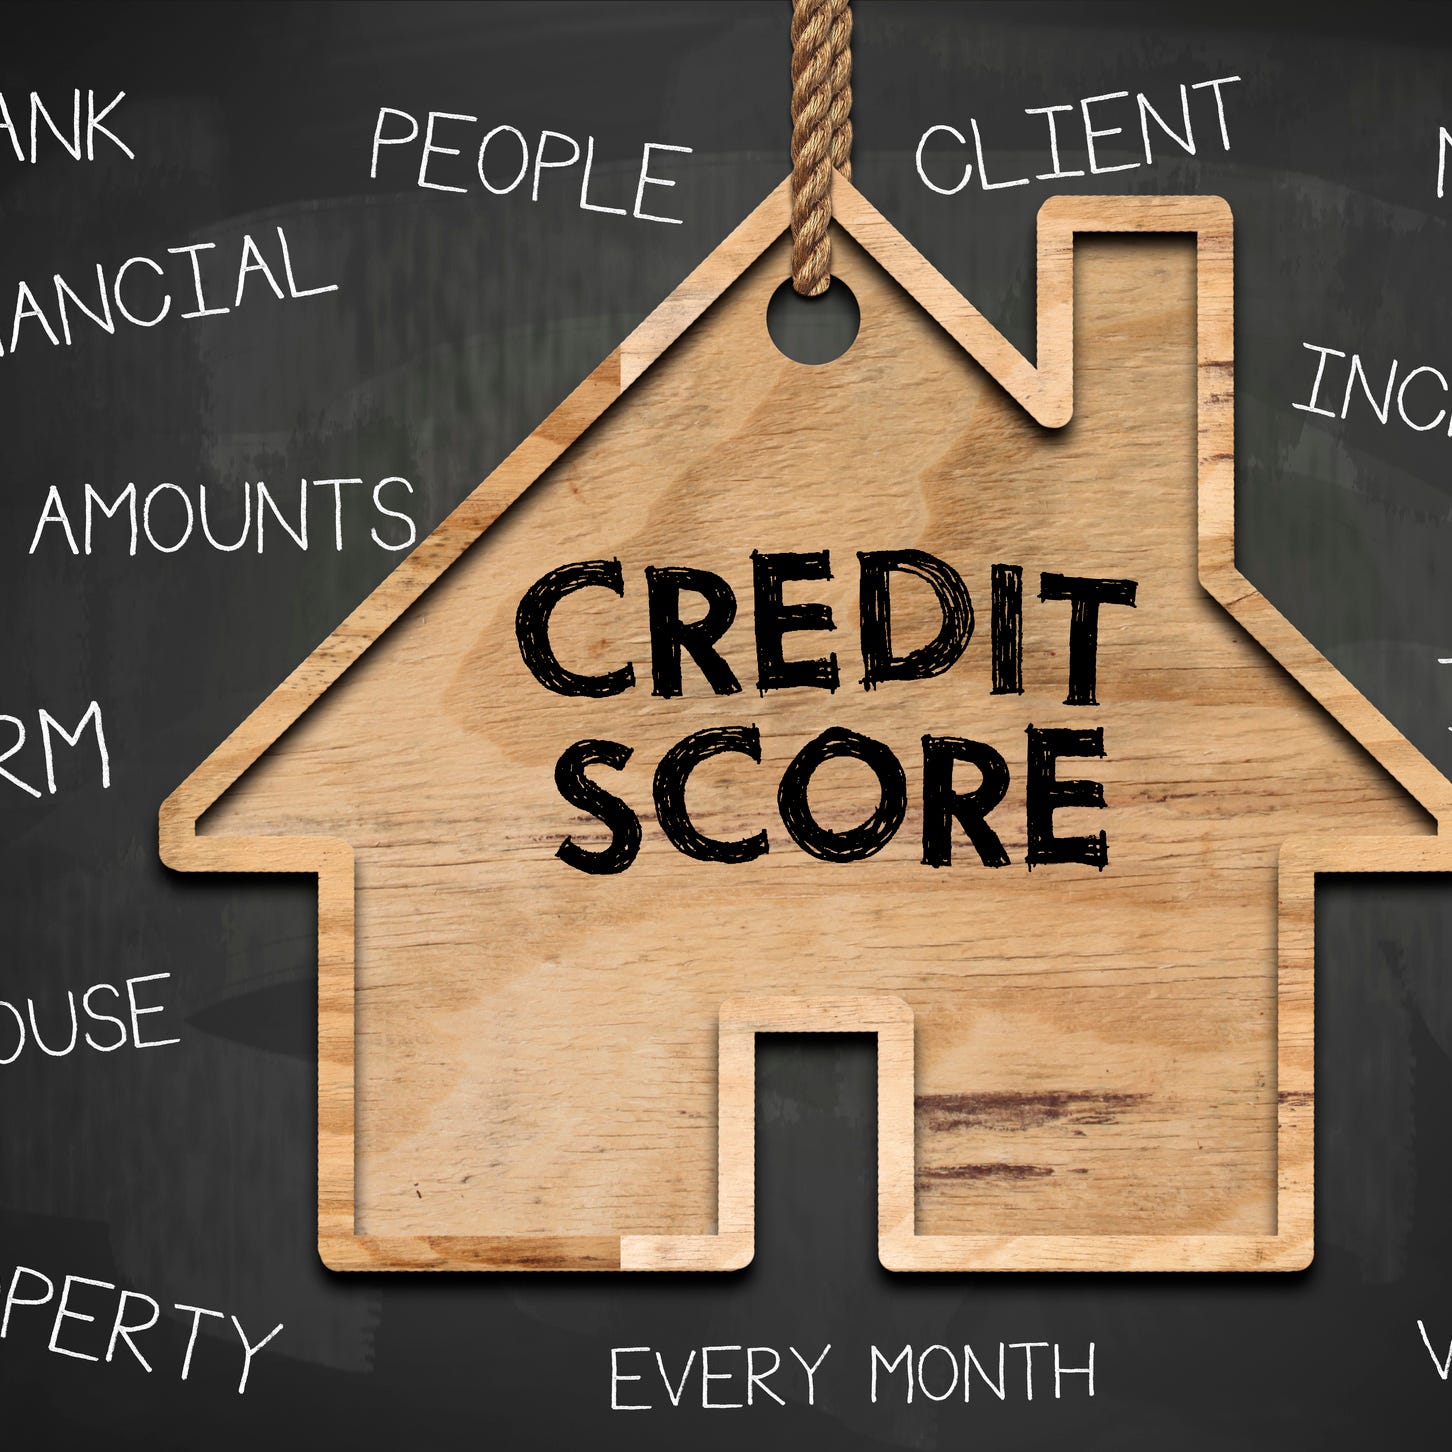 When you're tackling a major home improvement project, one tool in particular can help you get the job done for less hassle and potentially at a lower cost: a good credit score.